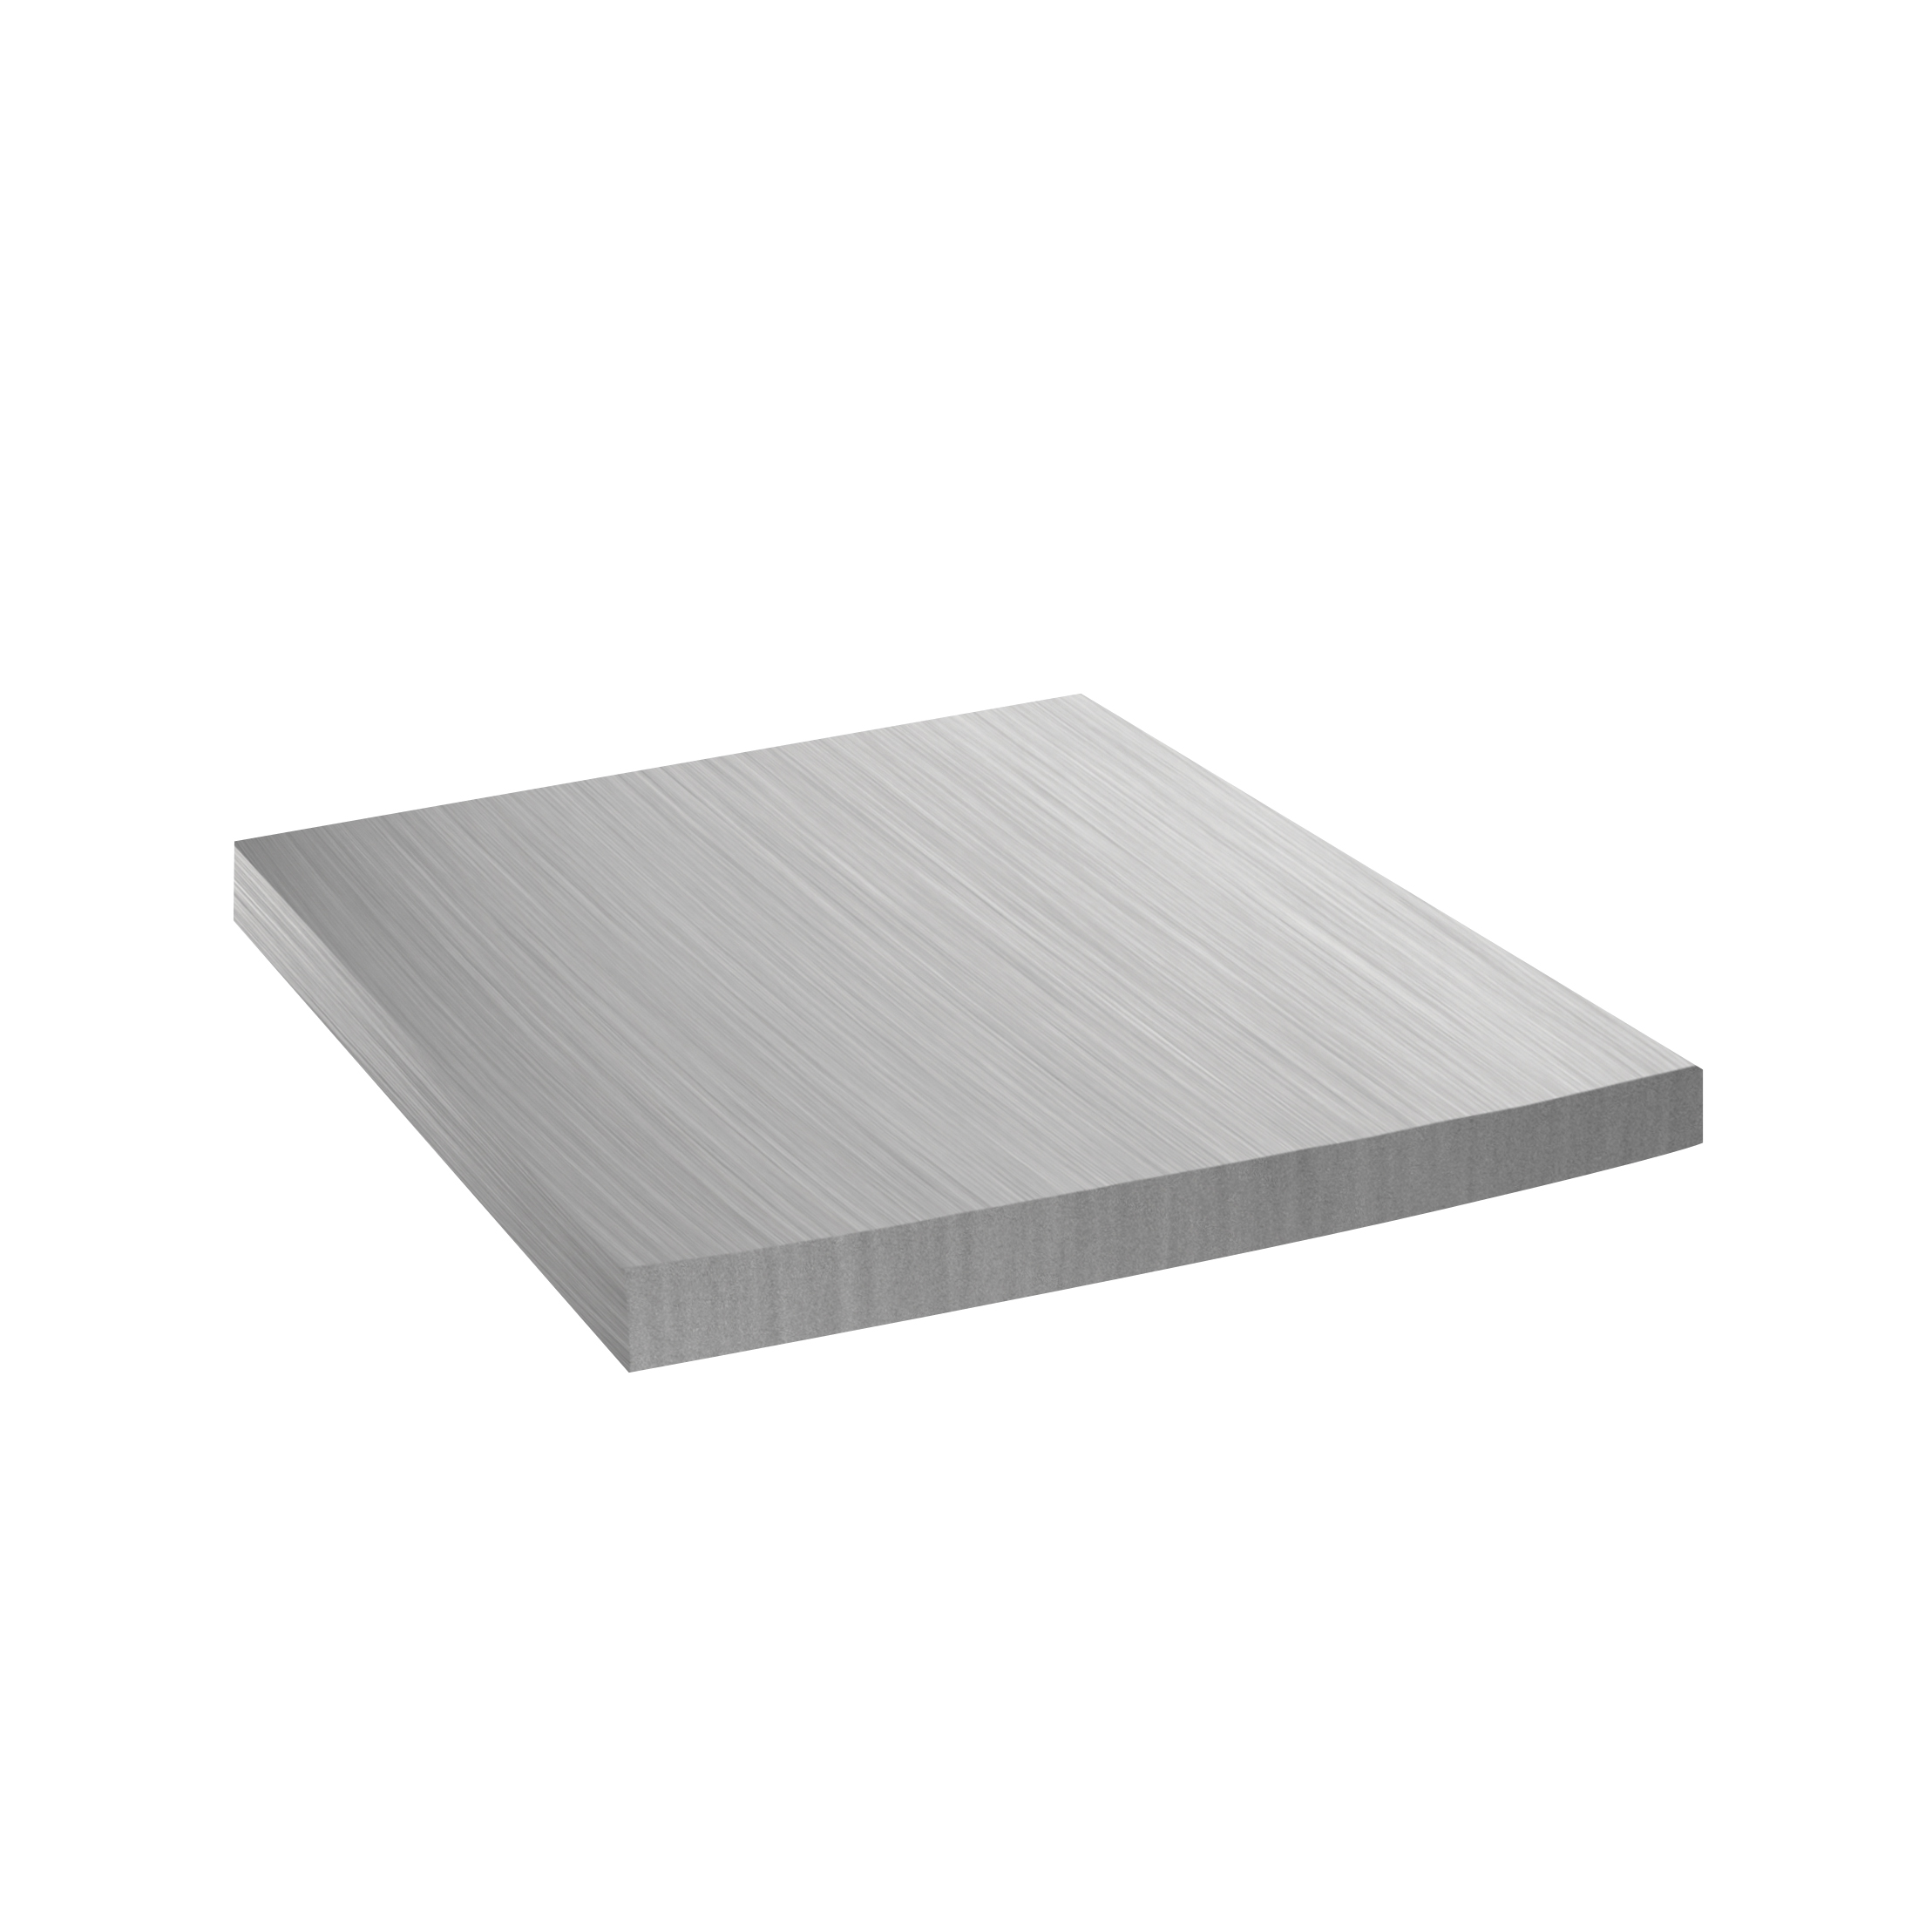 BenchMate soldering plate, 101.6mm x 101.6mm